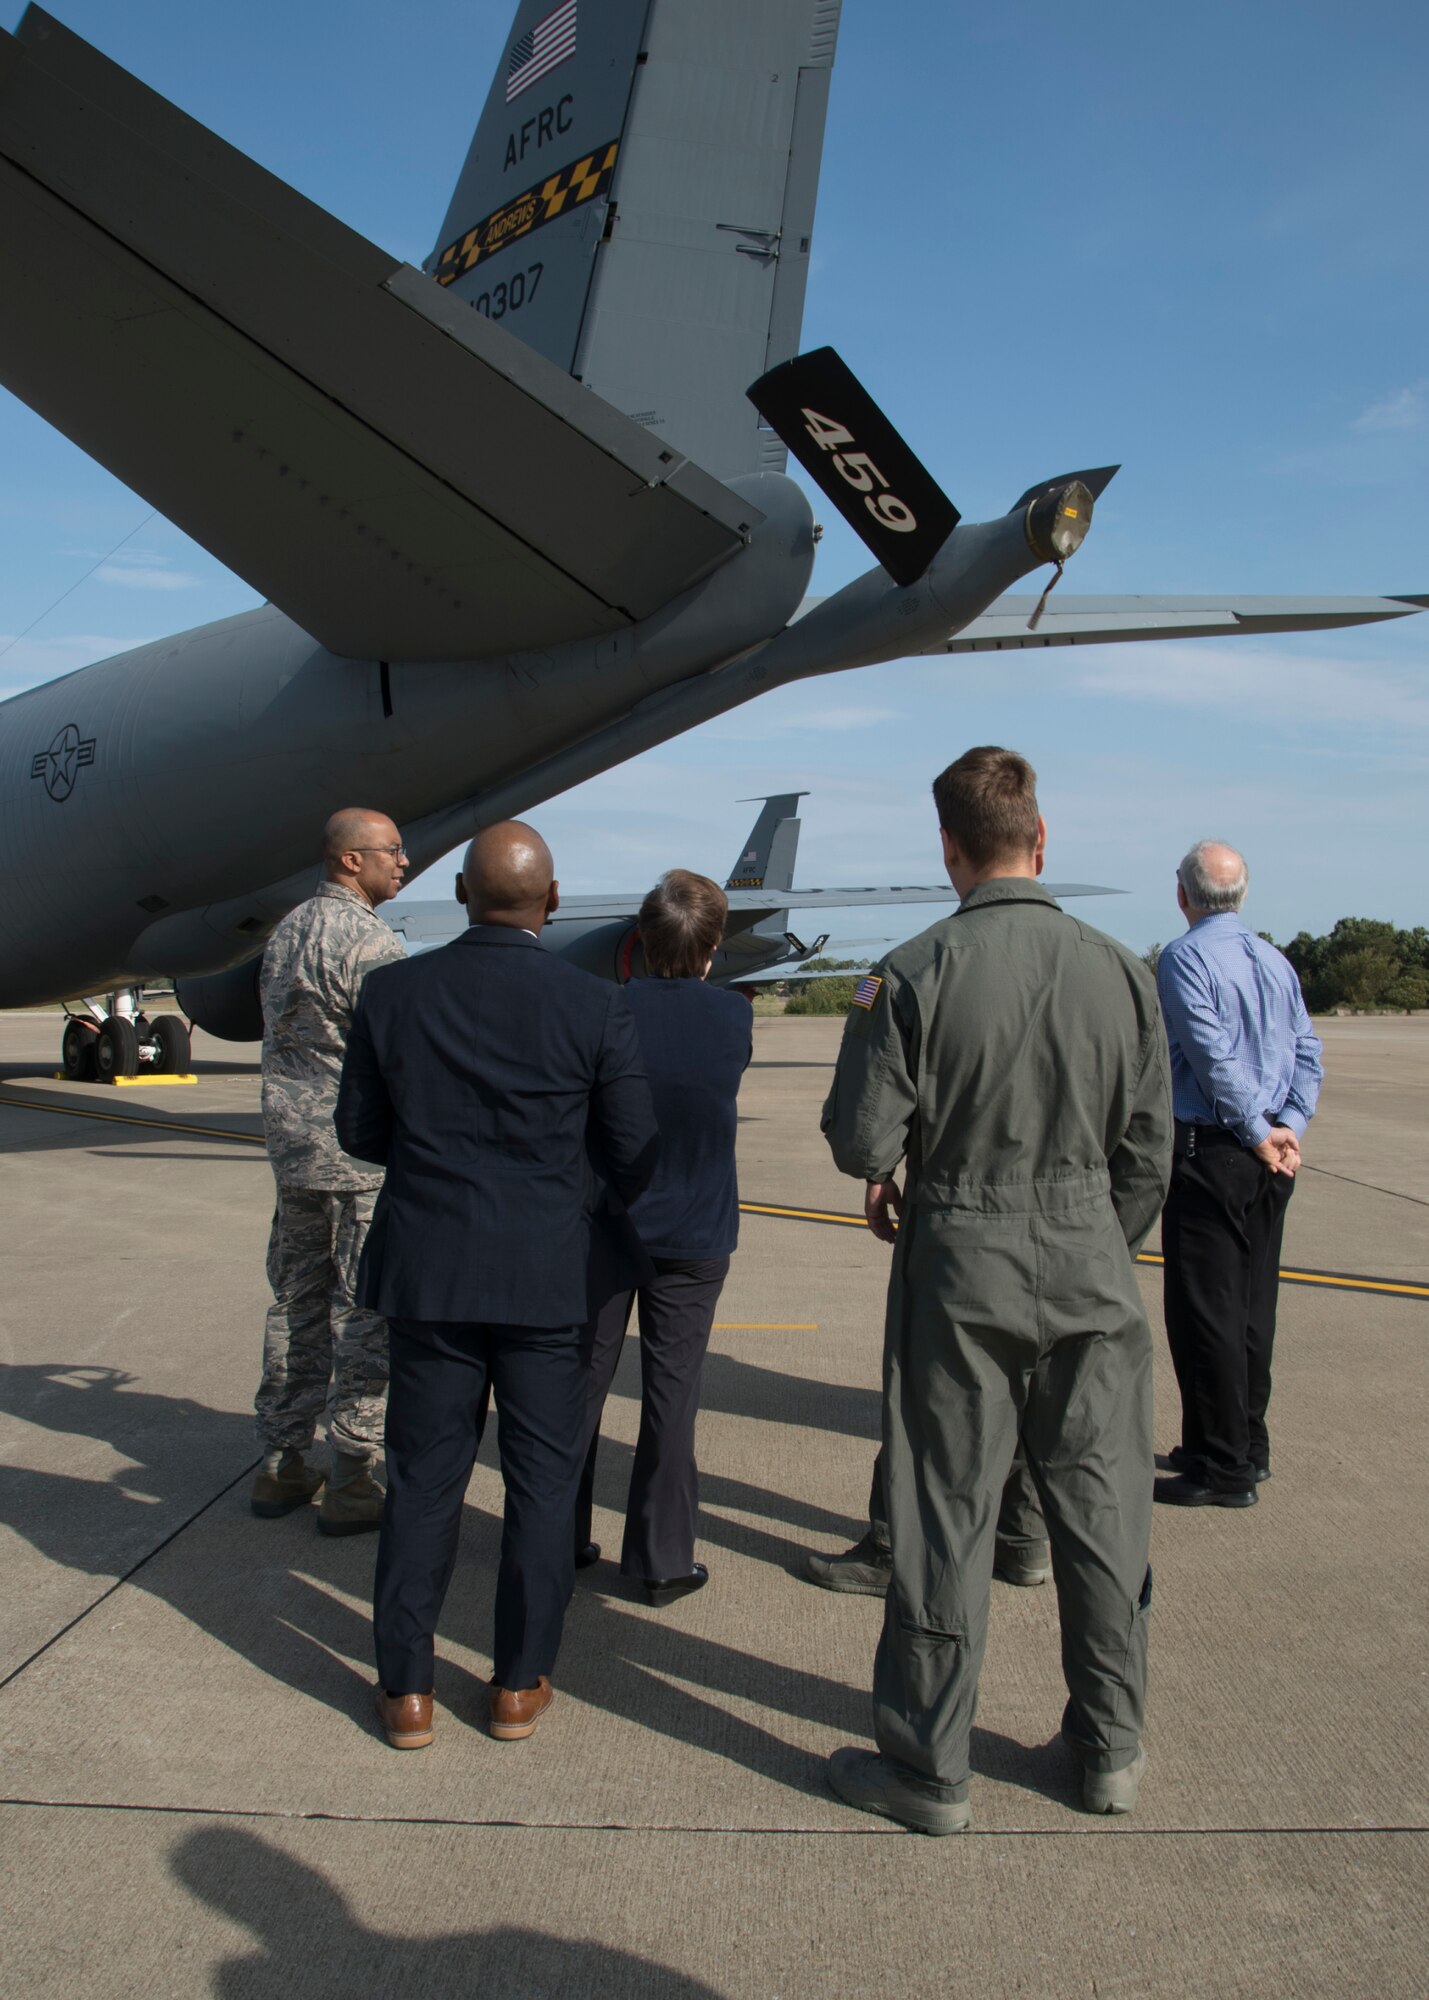 Members of Headquarters Air Force tour a KC-135 Stratotanker Oct. 7, 2019 on Joint Base Andrews, Md. The team was briefed on the KC-135 and given a tour of the aircraft. (U.S. Air Force photo by Staff Sgt. Cierra Presentado/Released)